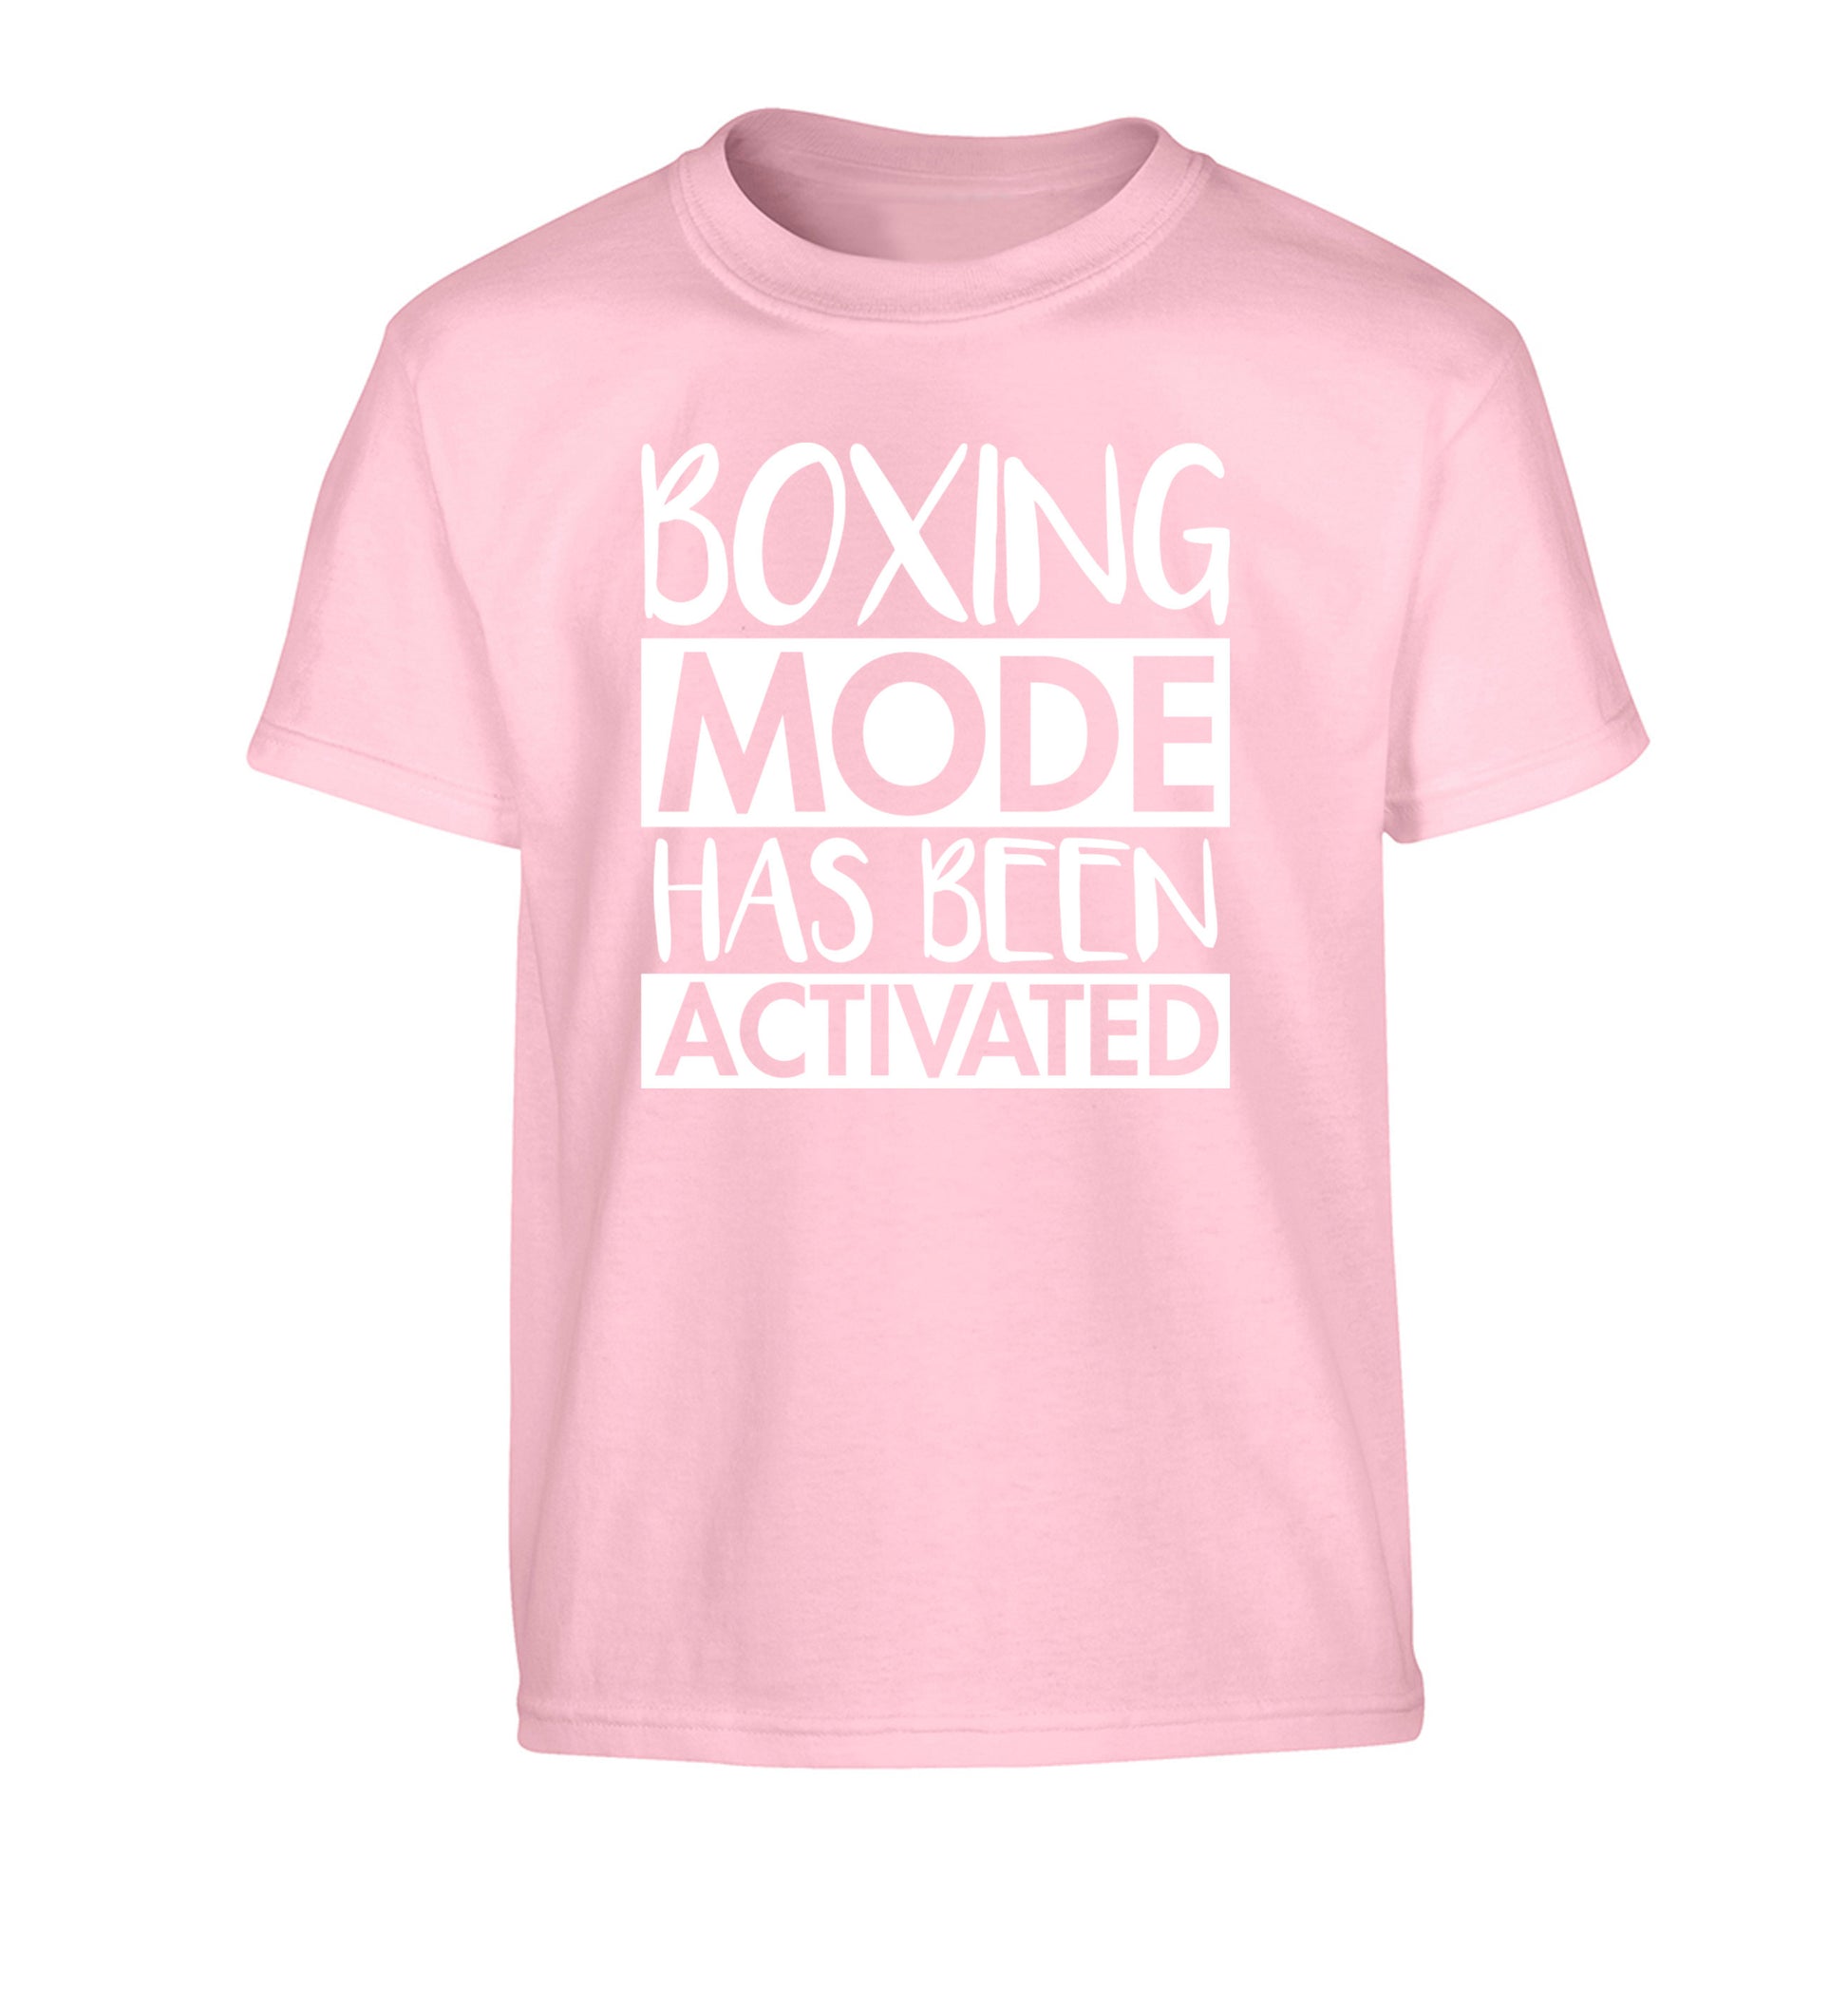 Boxing mode activated Children's light pink Tshirt 12-14 Years